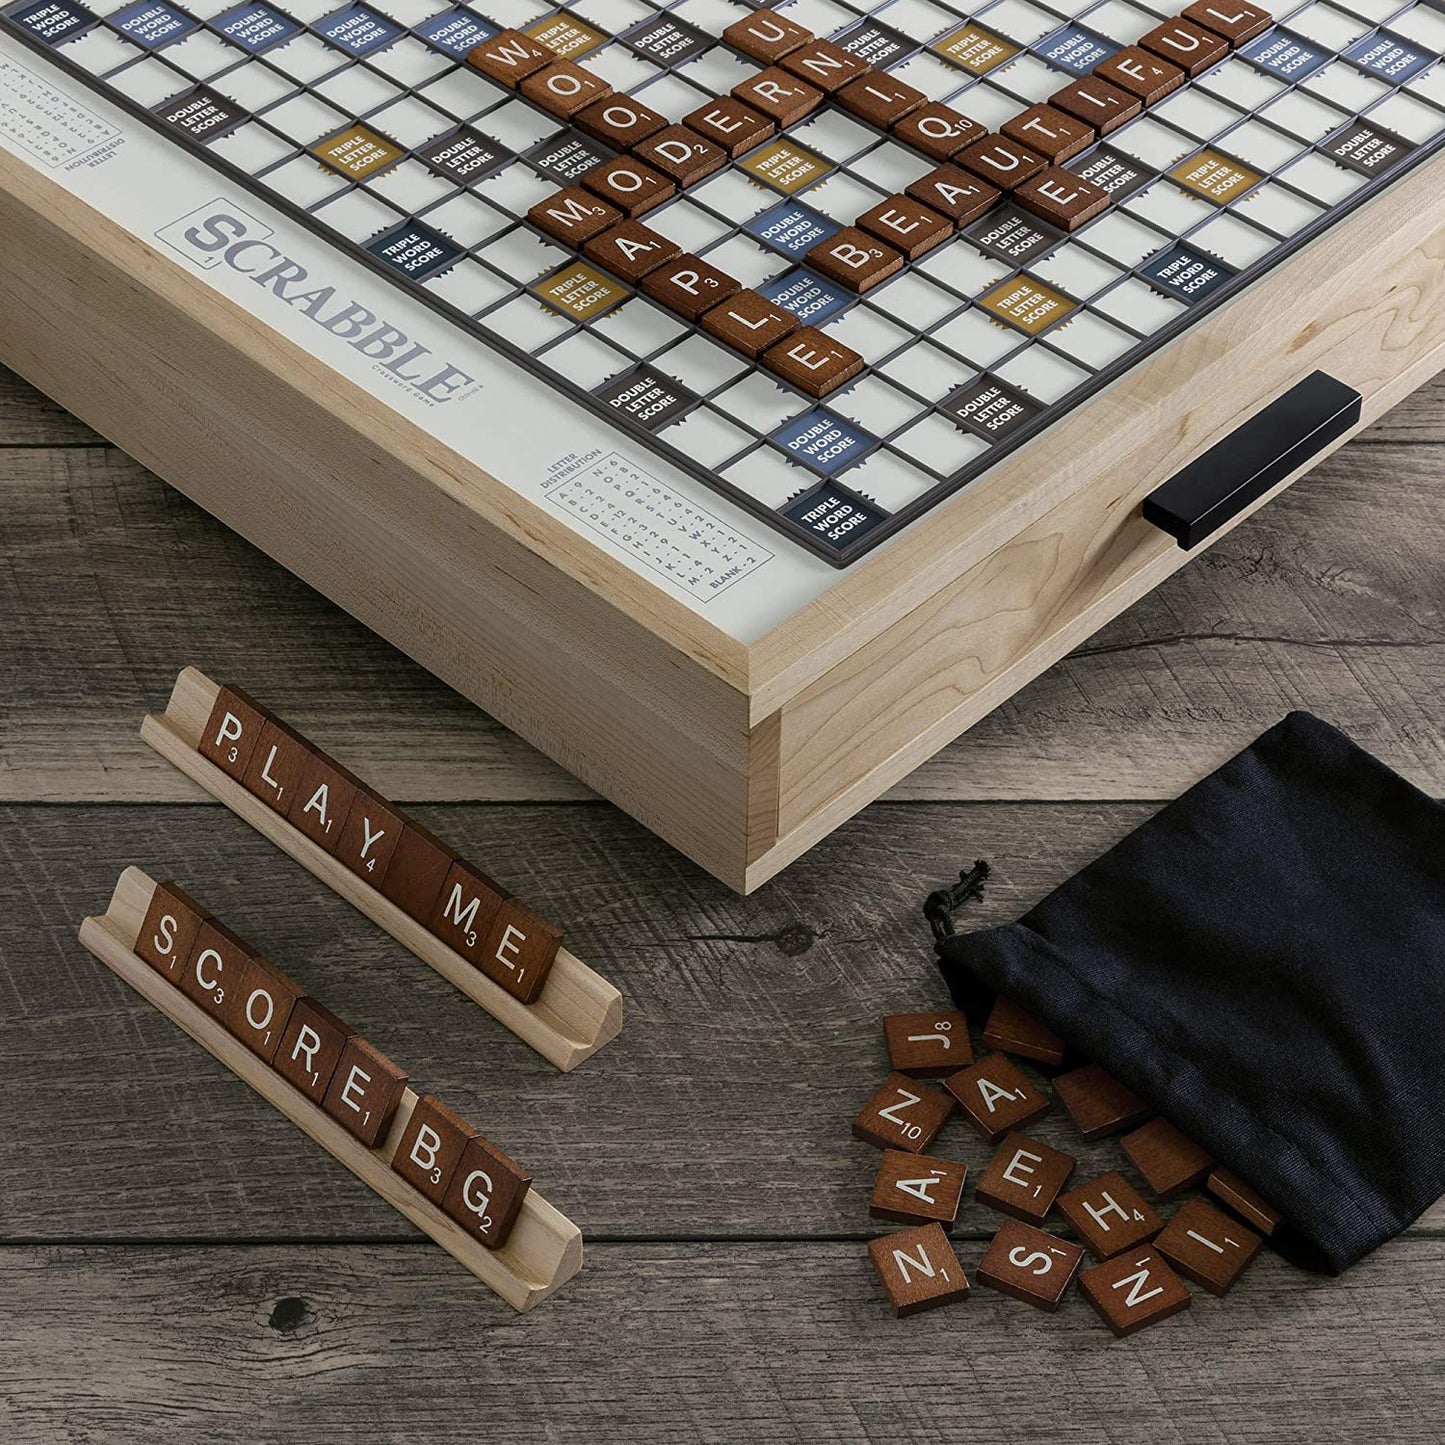 A close up view of a maple wood edition of Scrabble. Various letter tiles are on the board and on Scrabble letter holding trays.